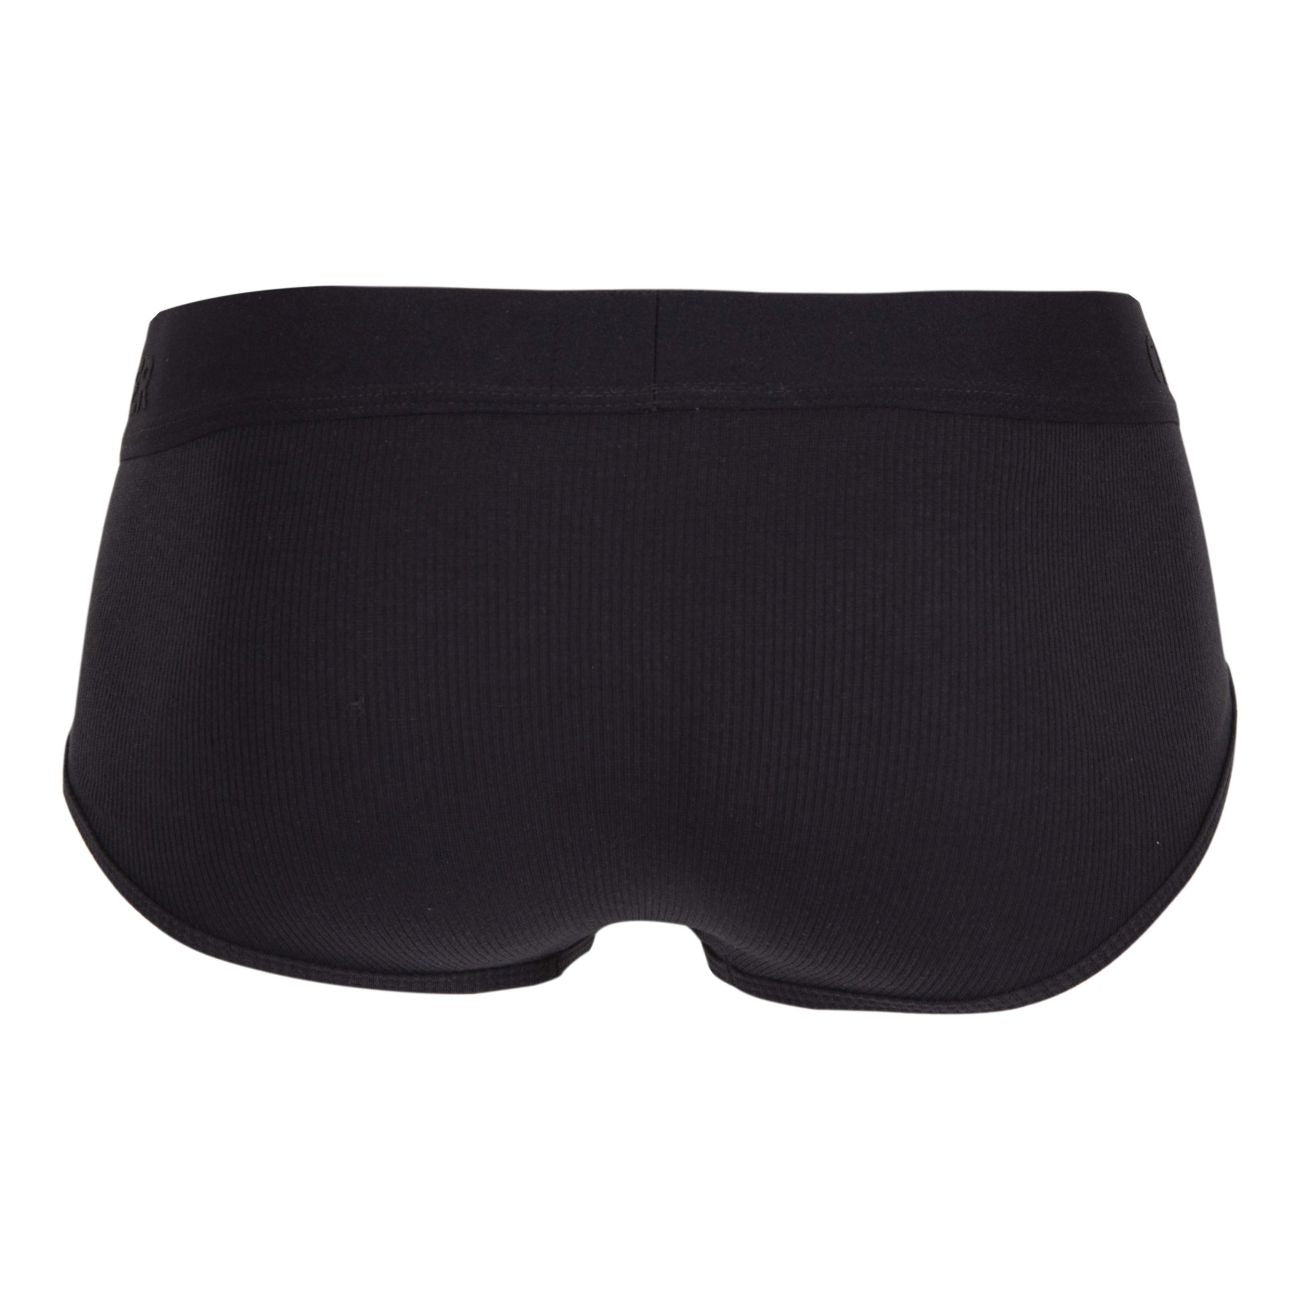 Clever 1472 Heavenly Briefs Black